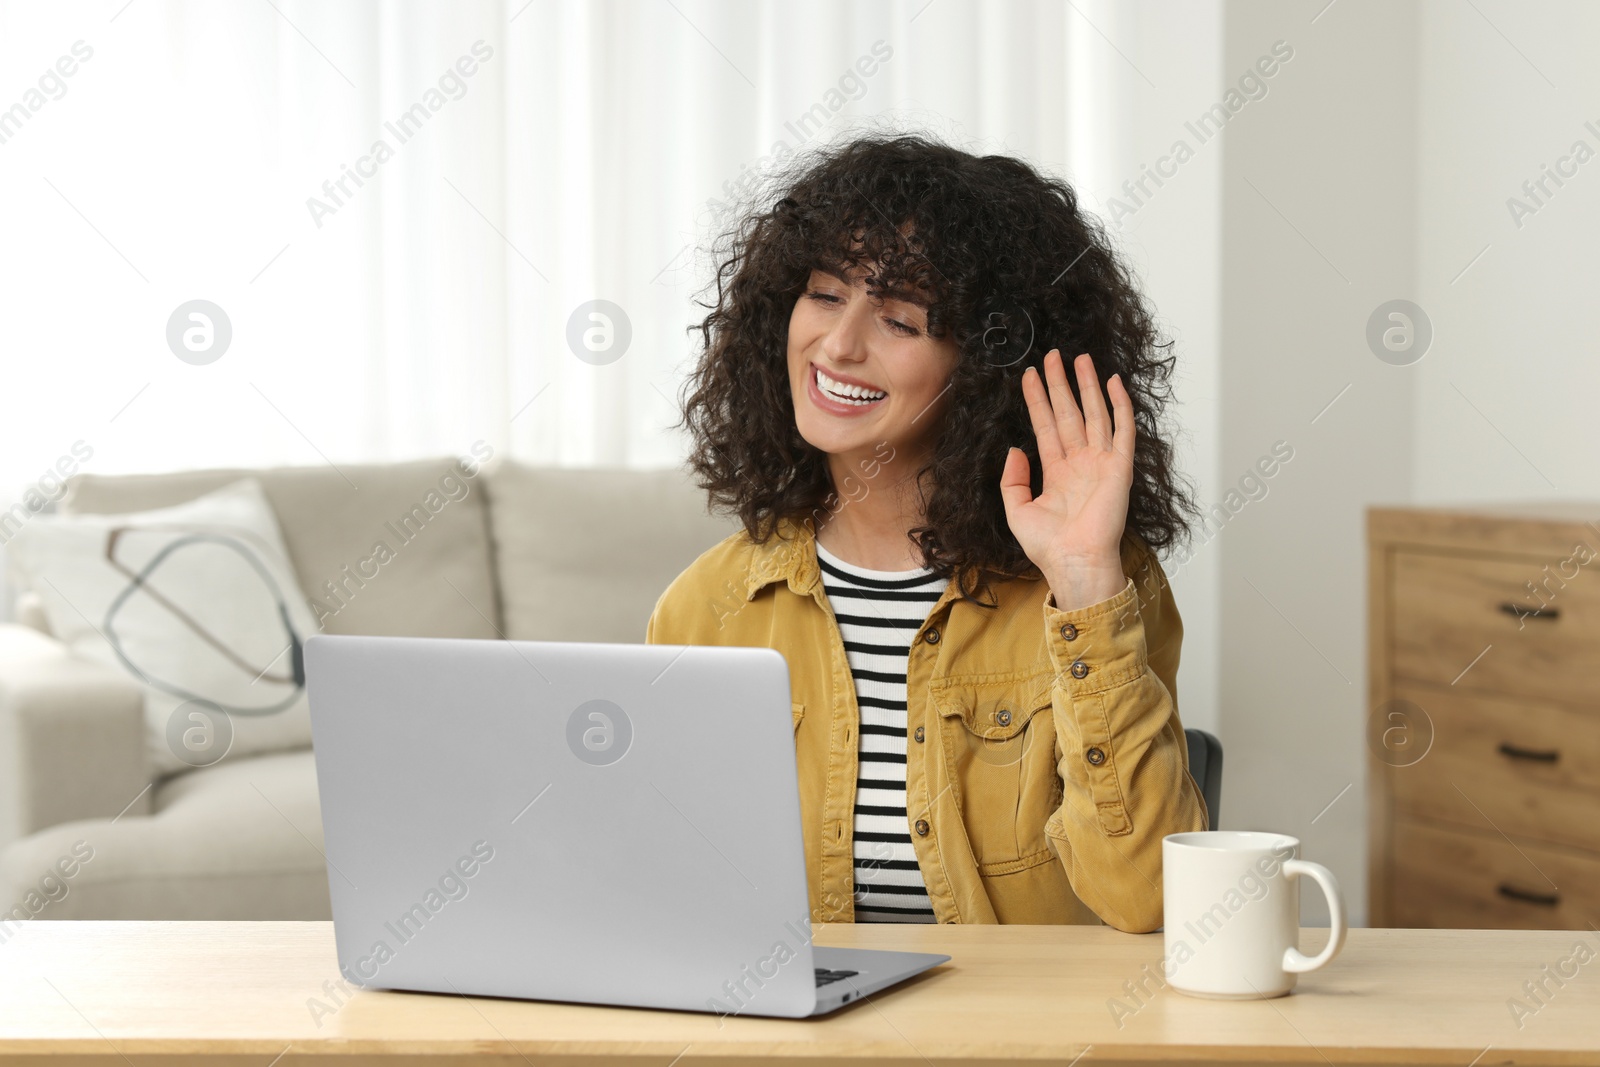 Photo of Happy woman waving hello during video call at table in room